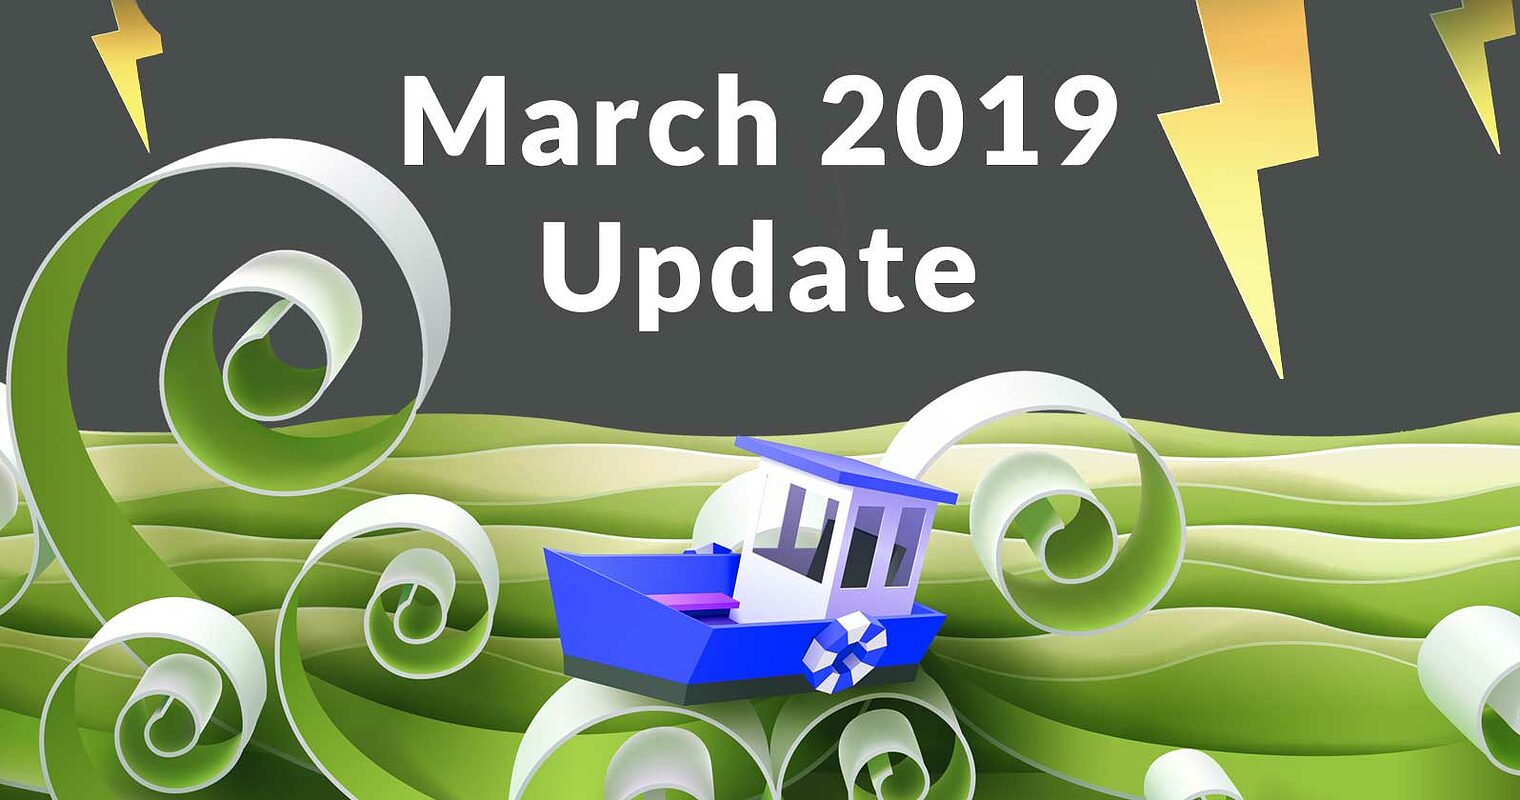 Google March 2019 Update Theories on How to Fix